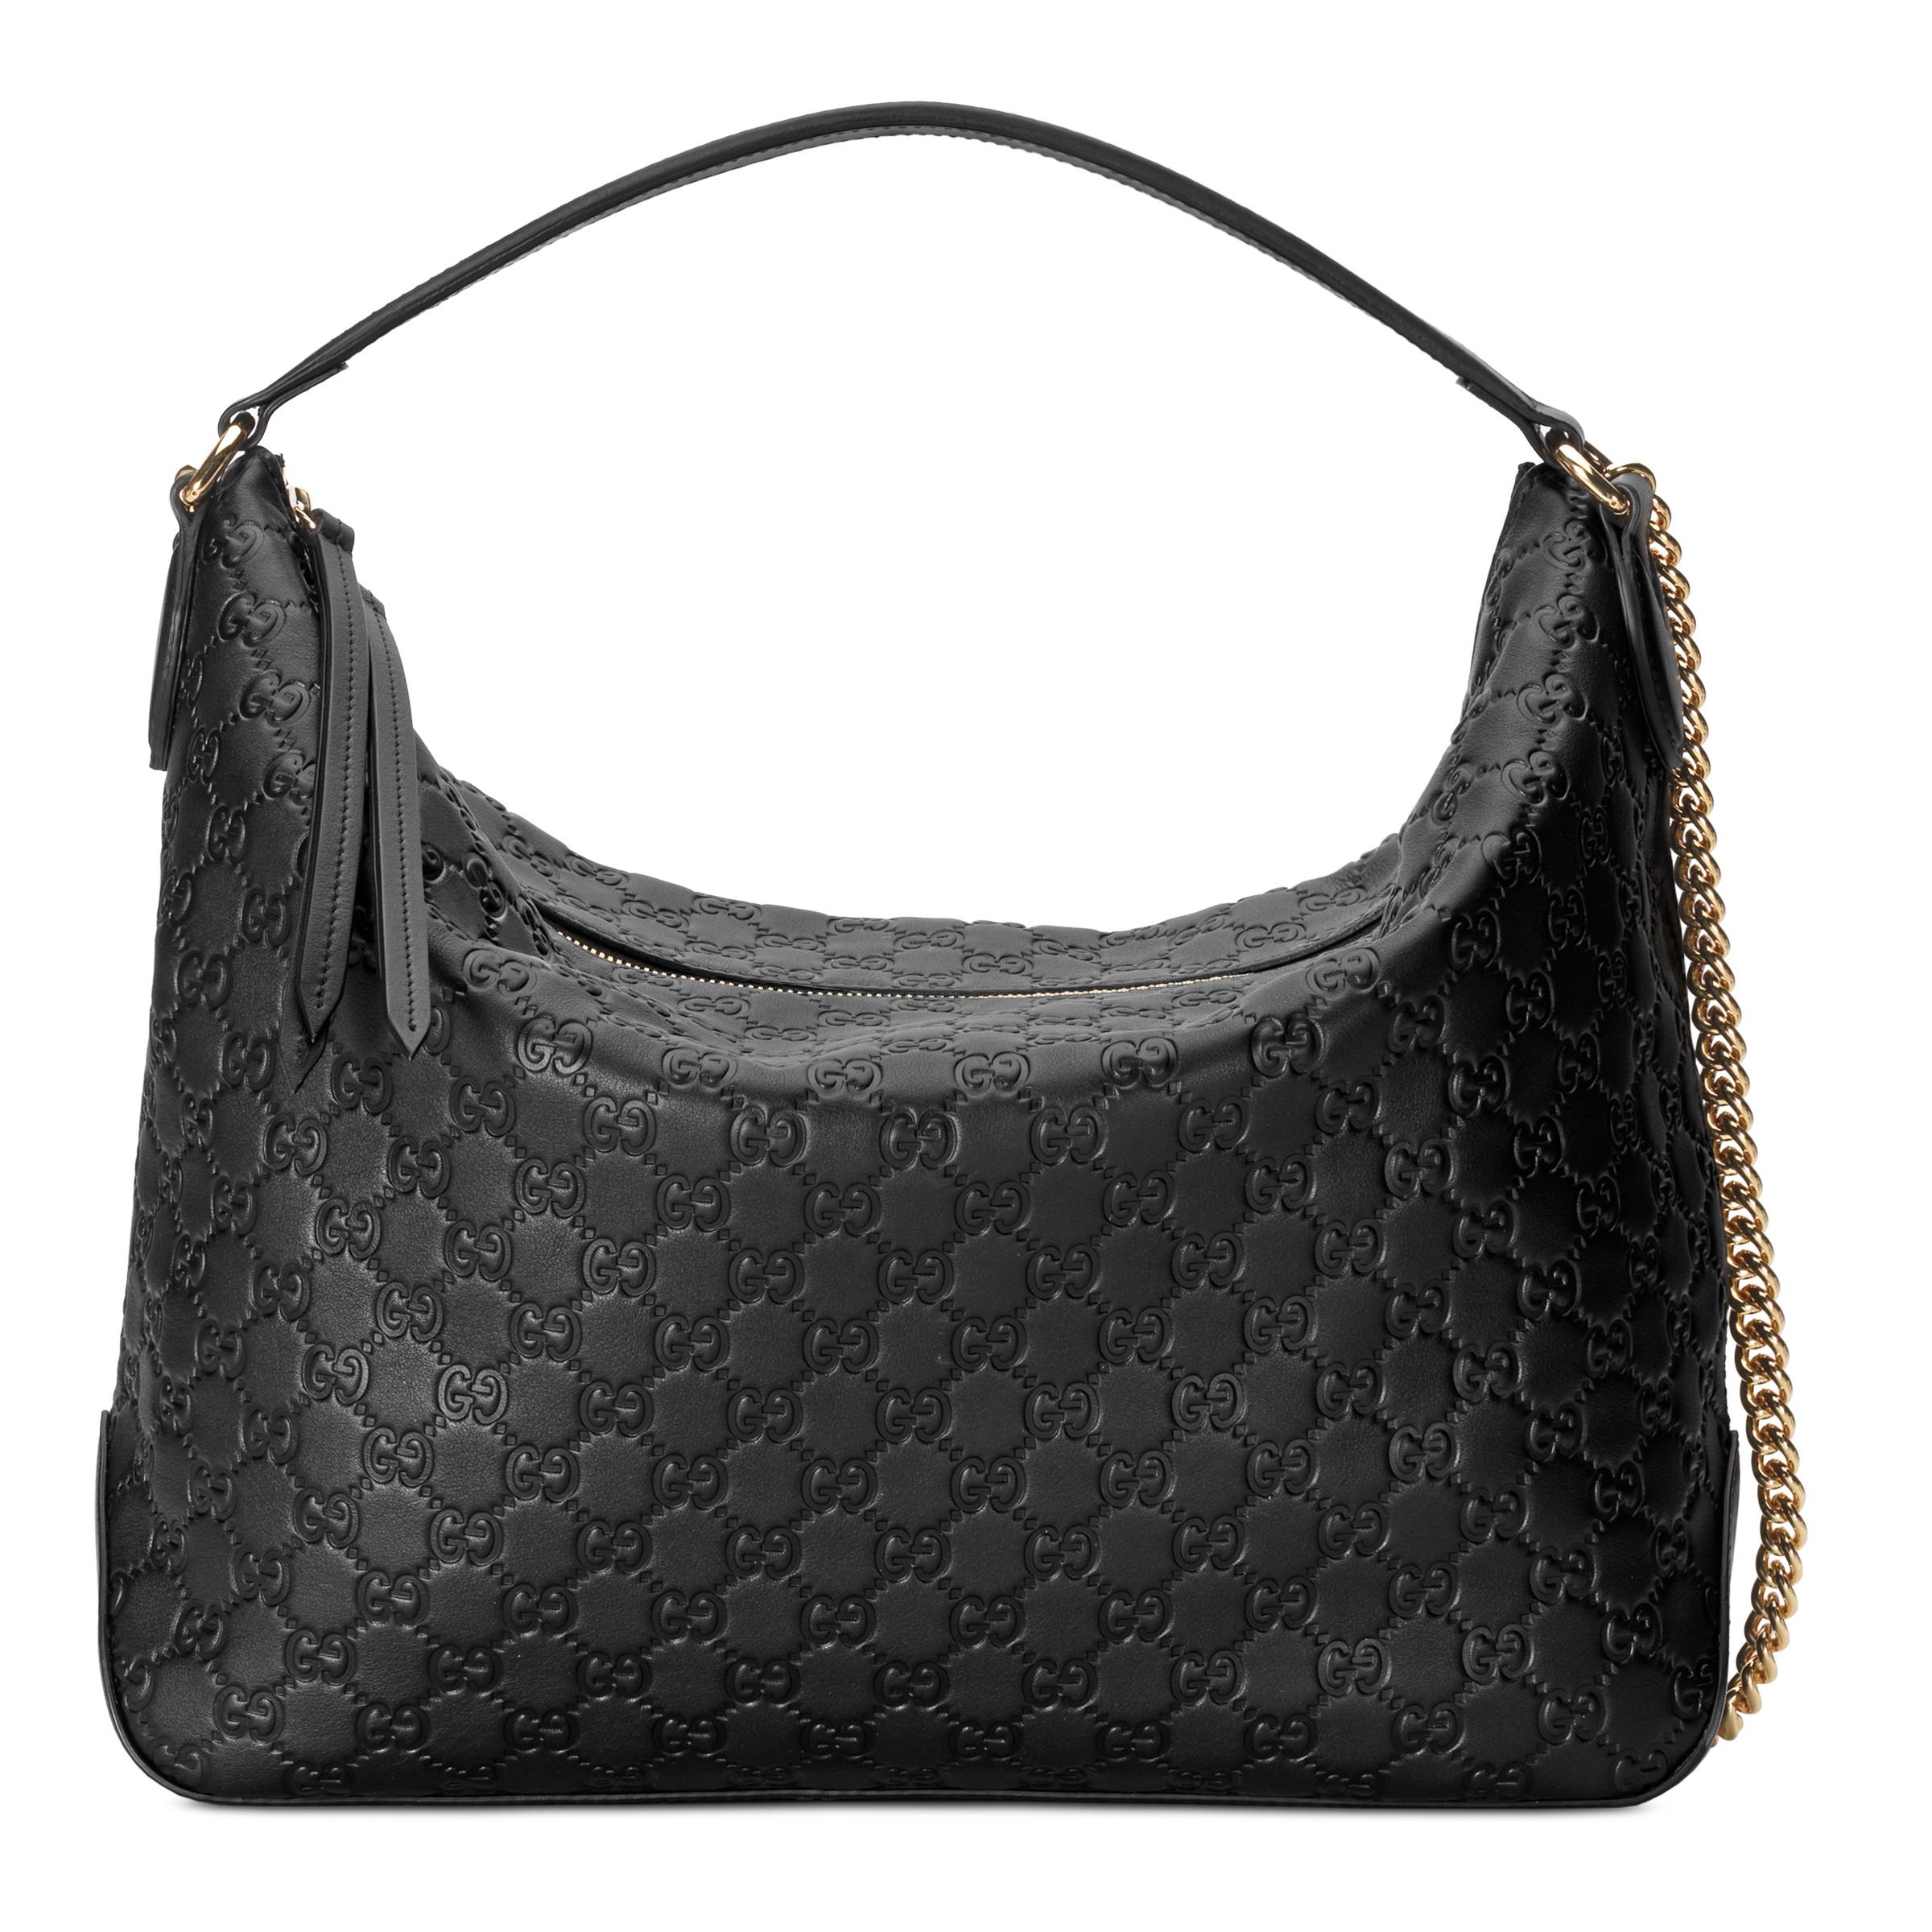 Gucci Signature Large Hobo Bag in Black | Lyst